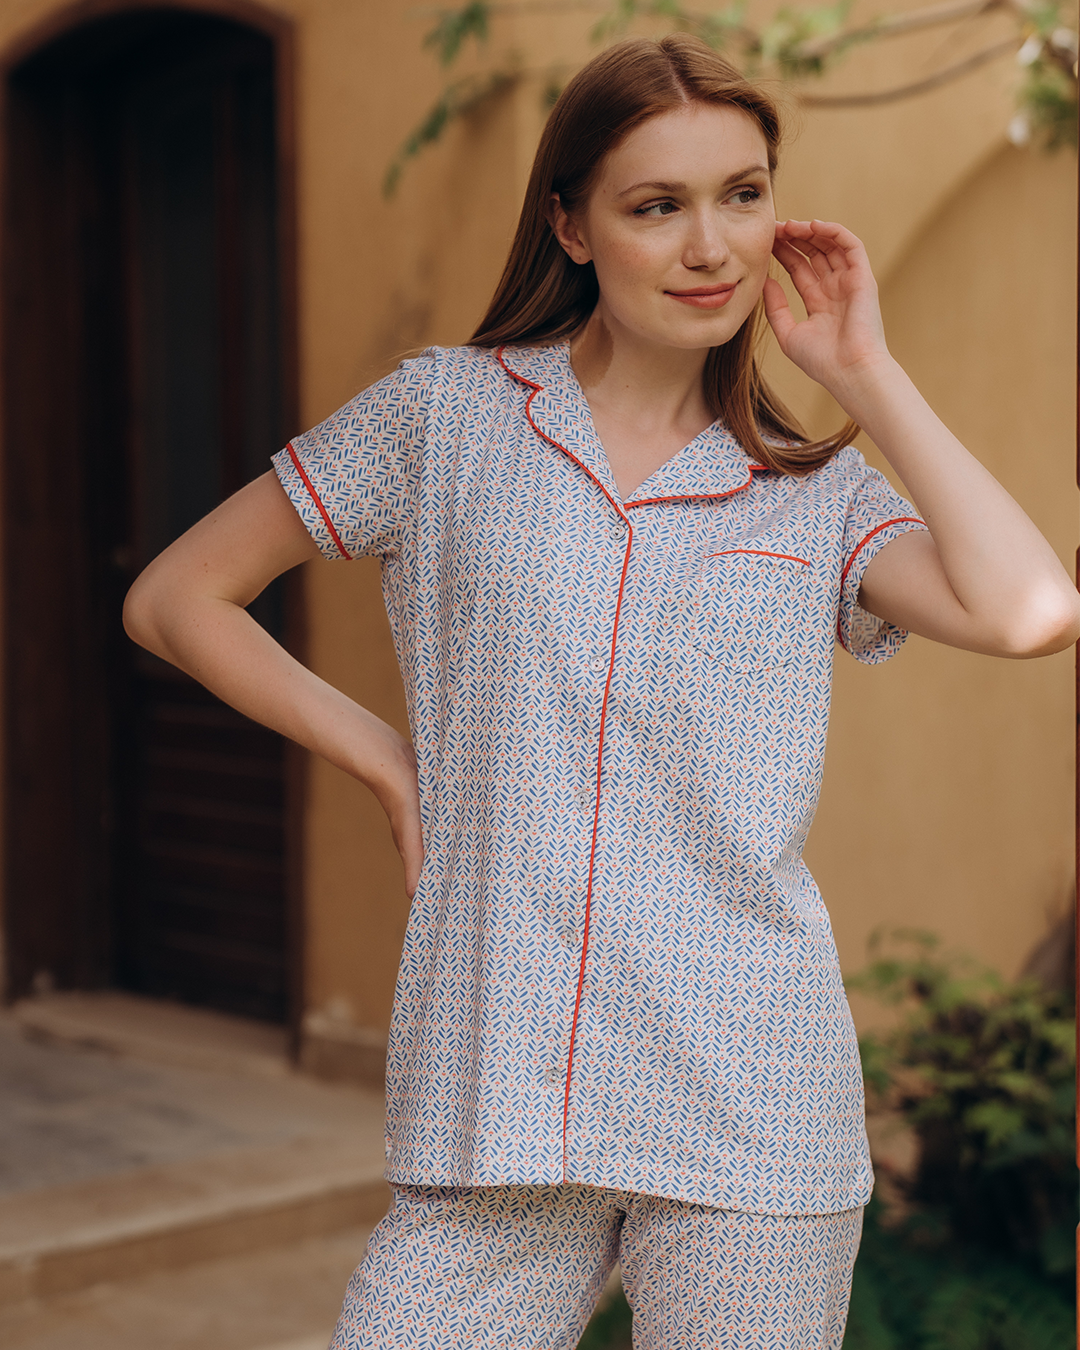 Classic women's pajamas with buttons, a pocket on the chest